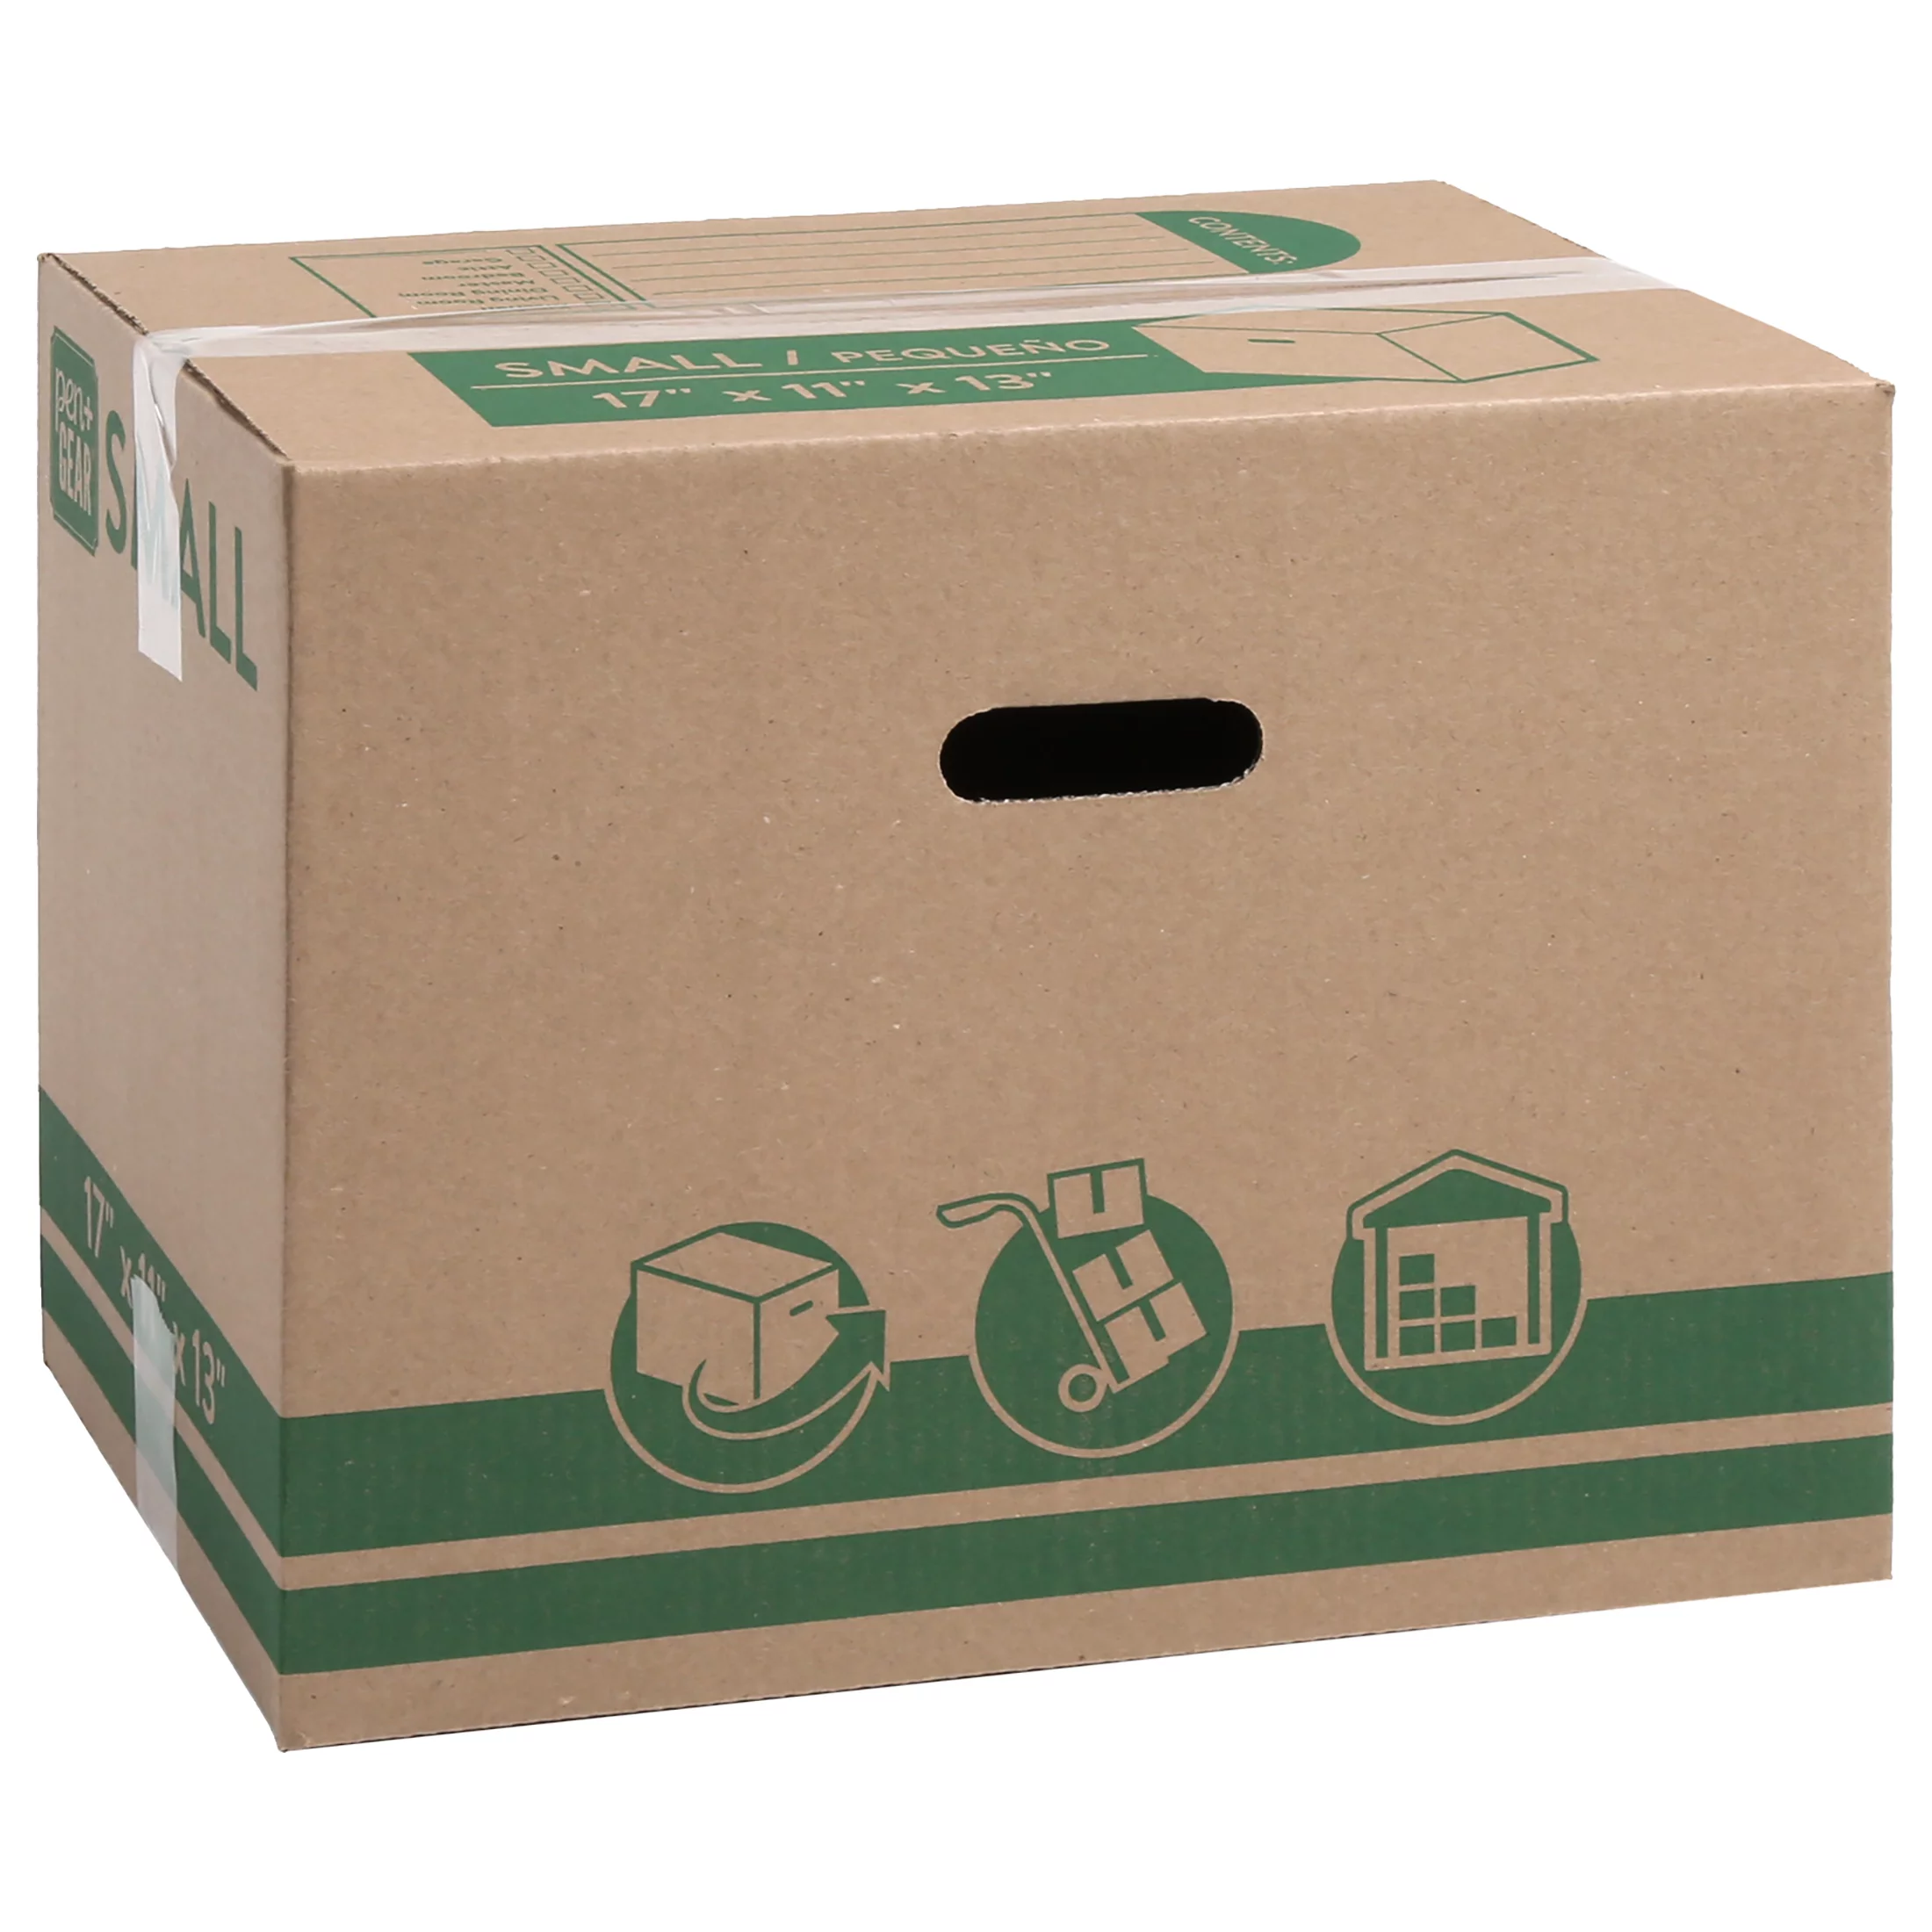 Pen + Gear Small Recycled Moving Boxes, 17L x 11W x 13H, Kraft